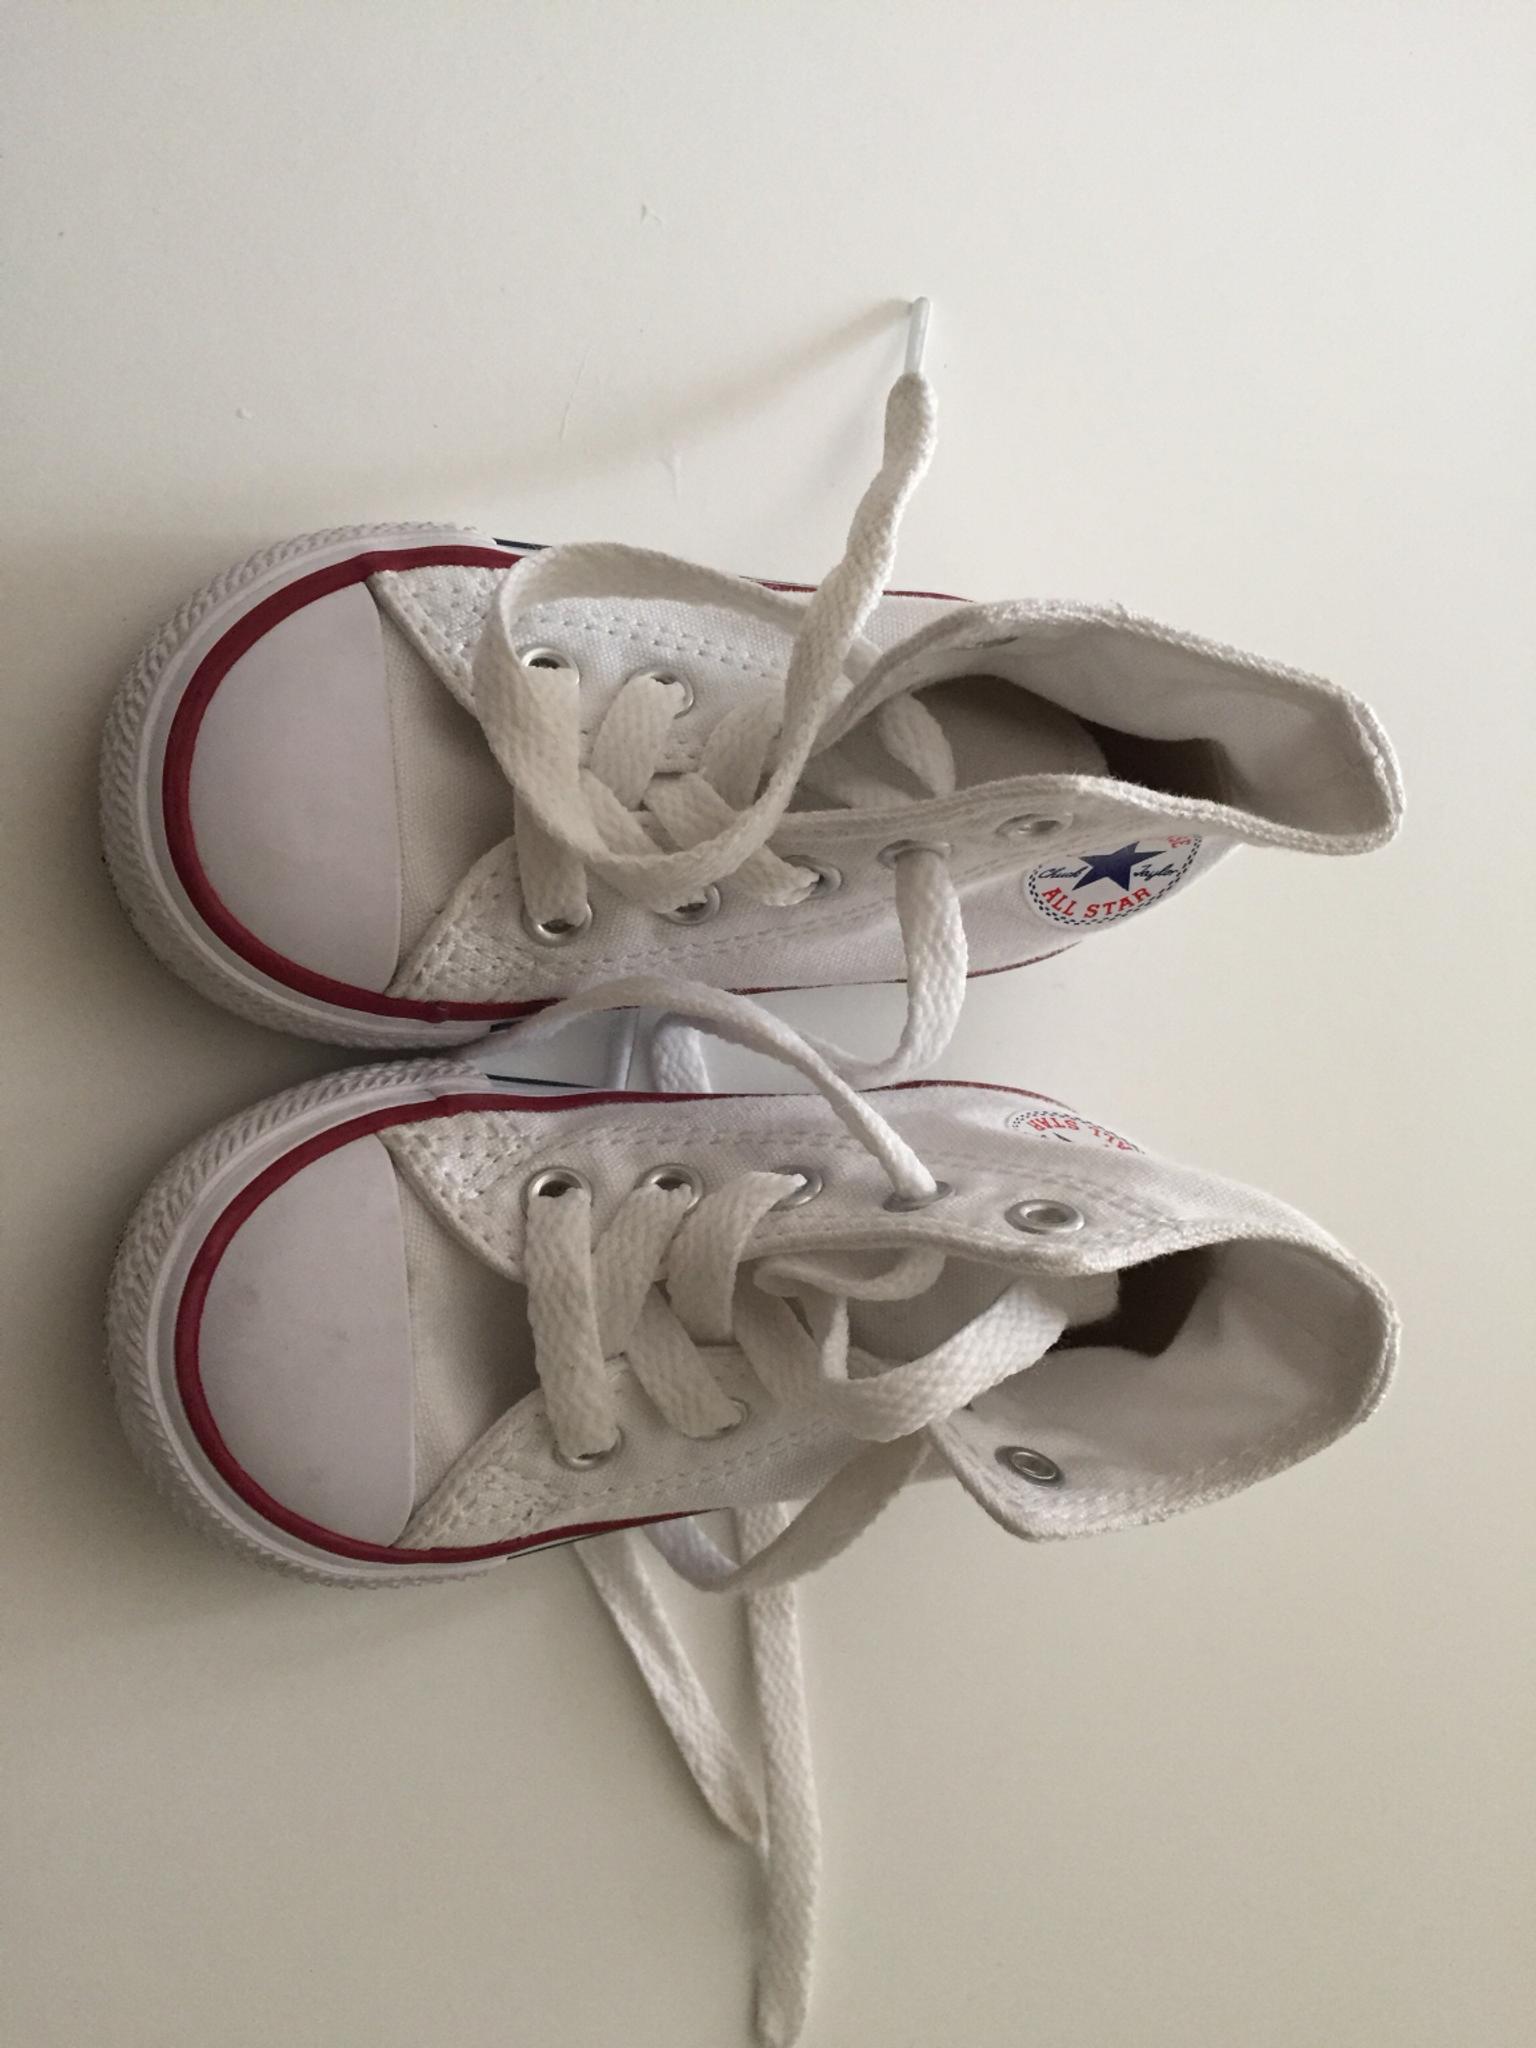 Converse All Star Infant bianche nr. 21 in 41012 Carpi for €25.00 for sale  | Shpock